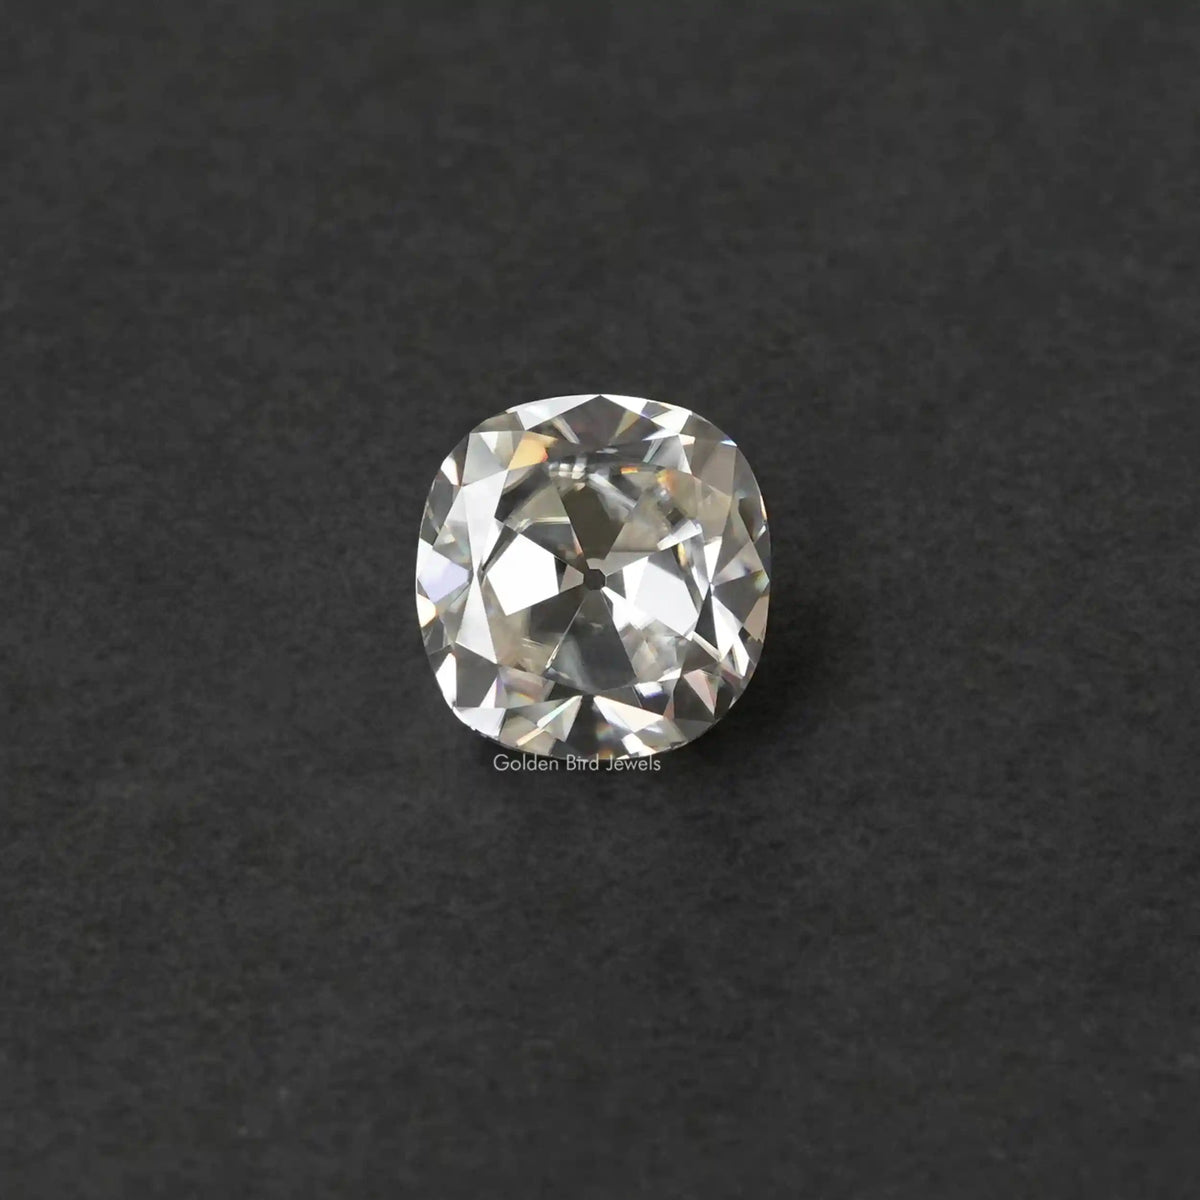 [Front view of colorless old mine cushion cut loose stone]-[Golden Bird Jewels]